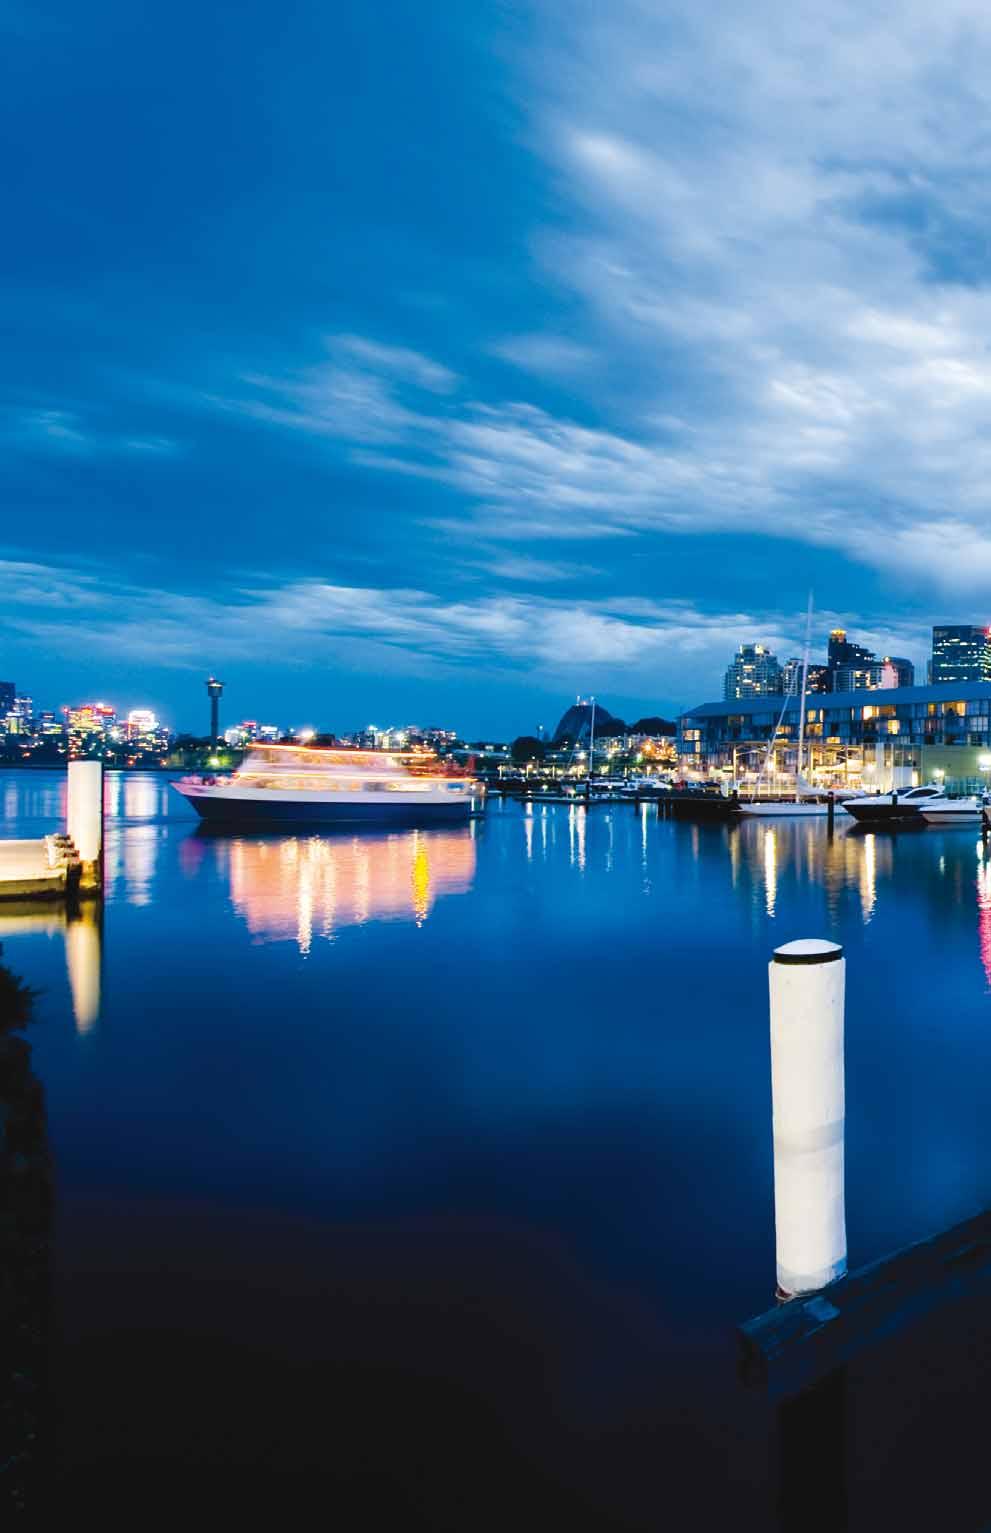 Only minutes from the Jones Bay Wharf venue, and Darling Harbour precinct, the venue is within easy walking distance of the CBD, restaurants, shopping and all the attractions that Sydney city has to